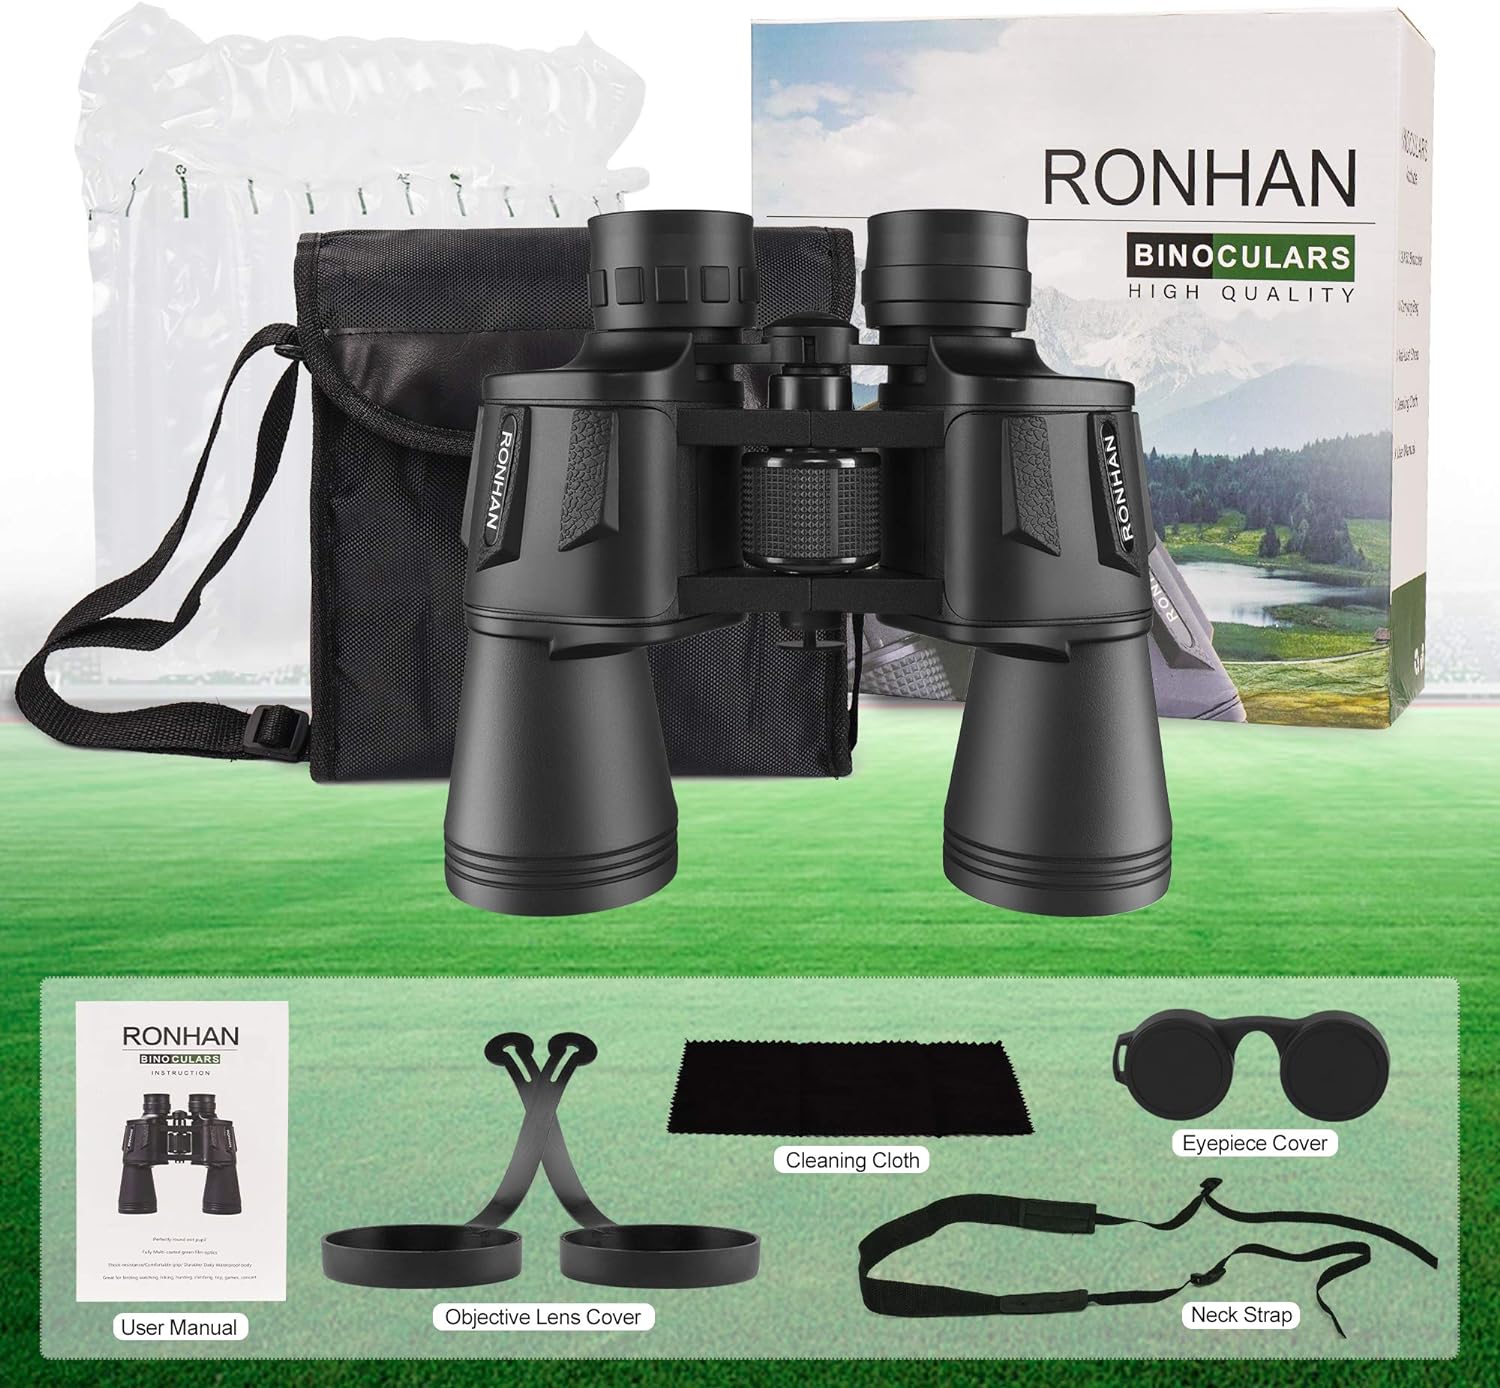 20x50 High Power Binoculars for Adults, Military Compact HD Professional/Daily Waterproof Binoculars Telescope for Bird Watching Travel Hunting Football Games Stargazing with Carrying Case and Strap